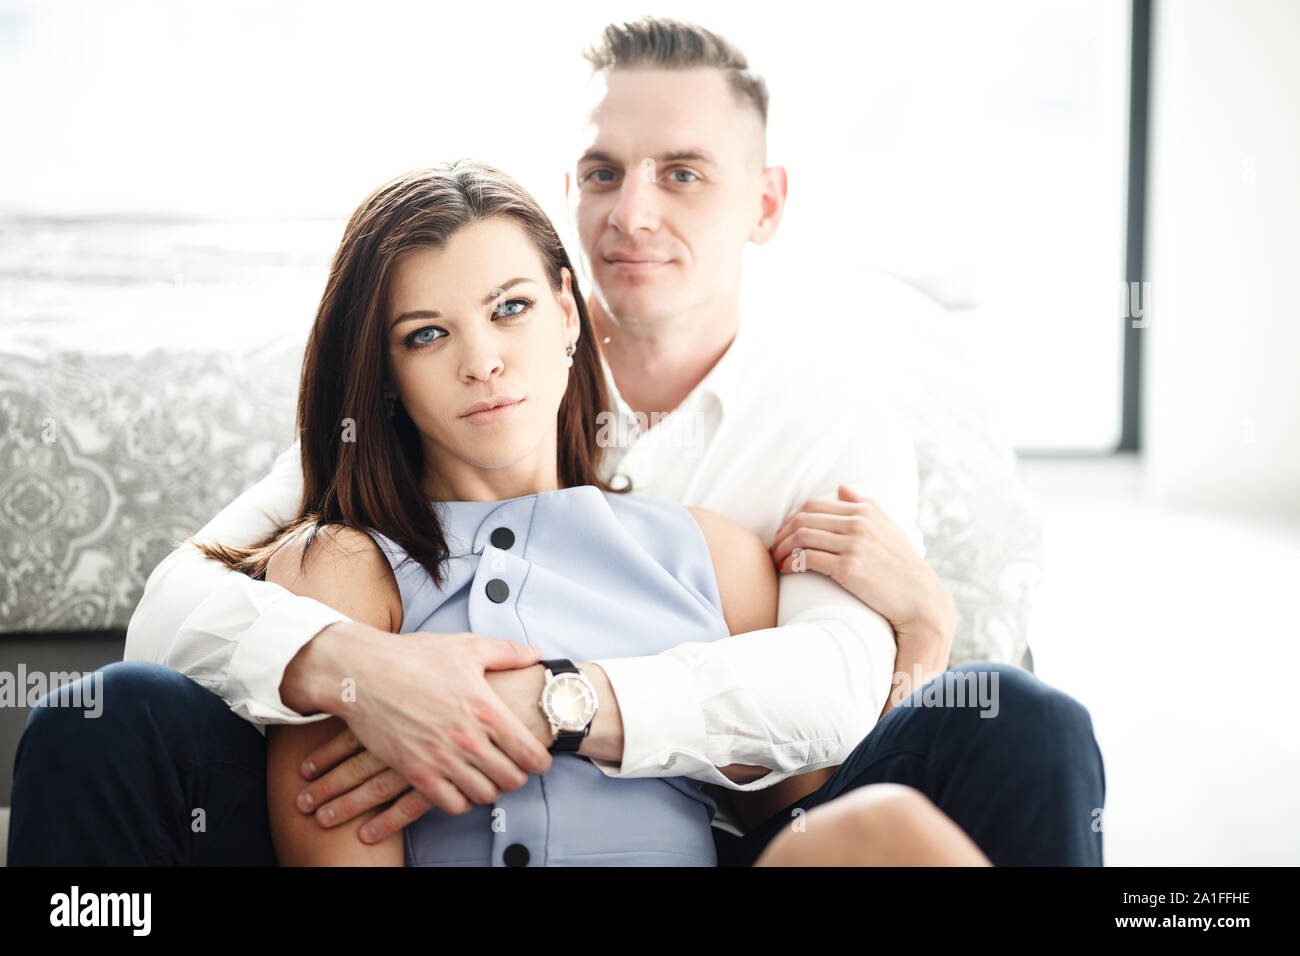 Relaxed young couple having a good times at home Stock Photo